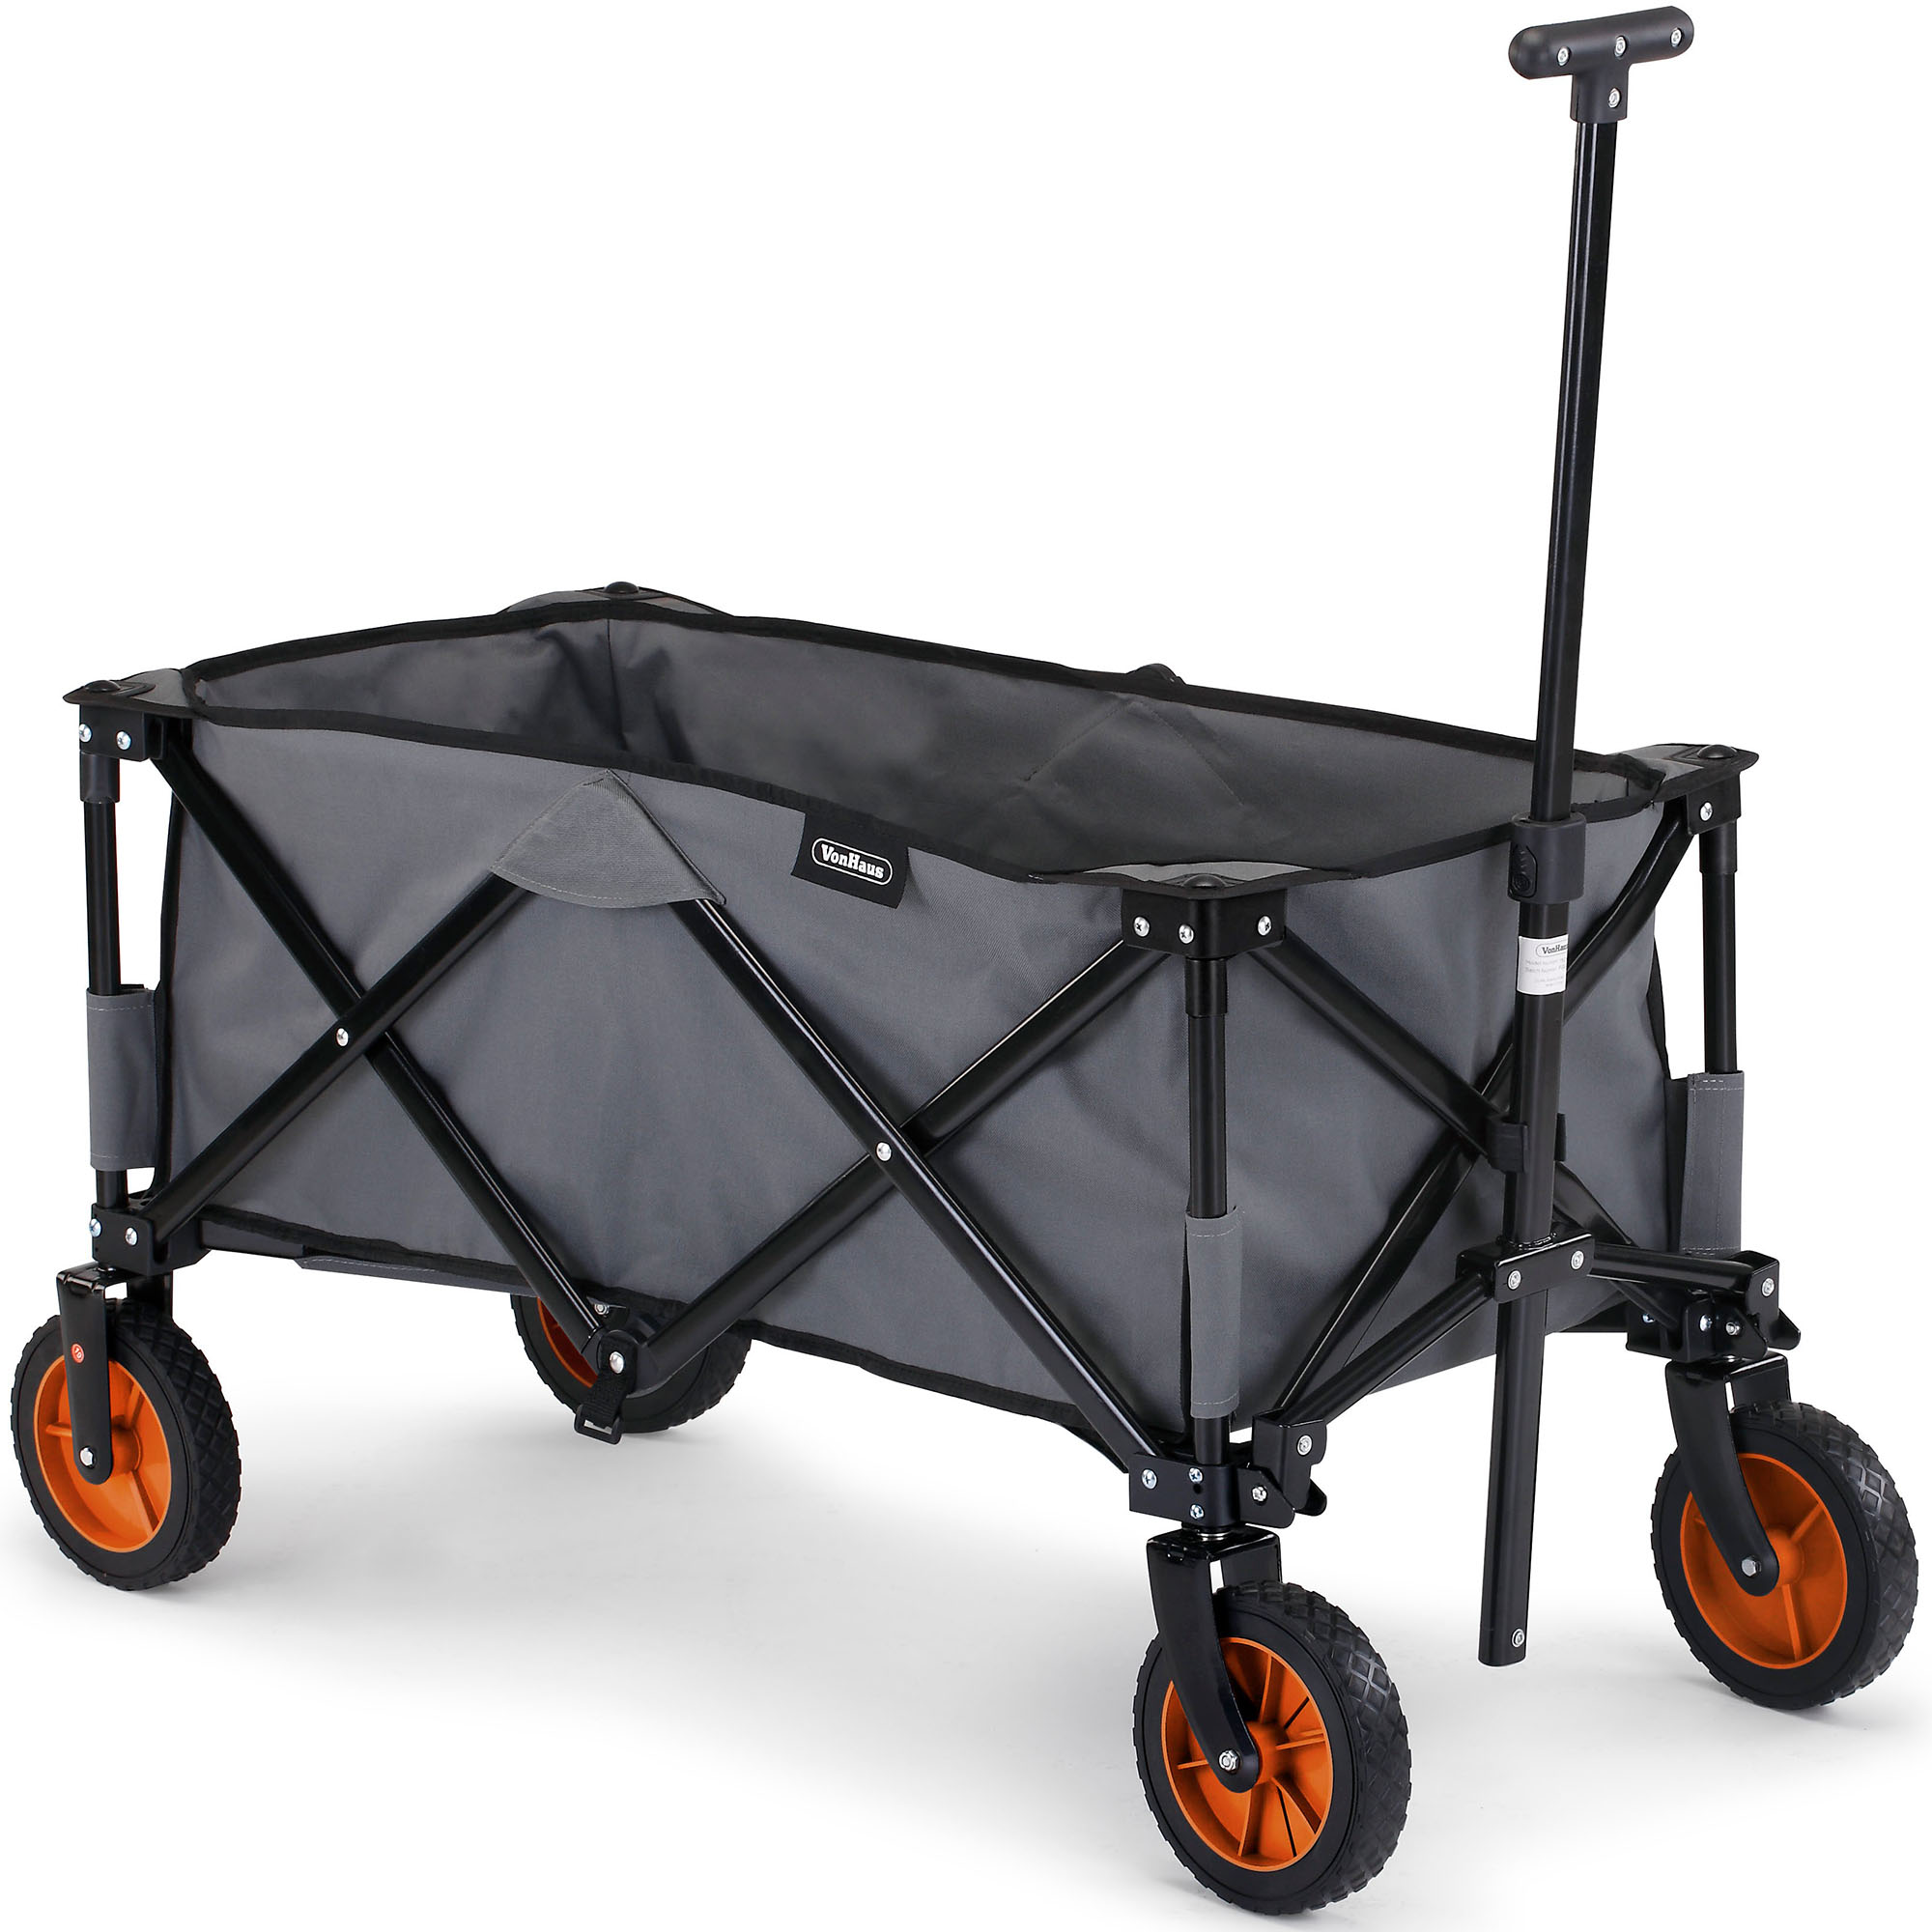 VonHaus Folding Camping Cart with Lining -  4 Wheeled Collapsible Festival Trolley